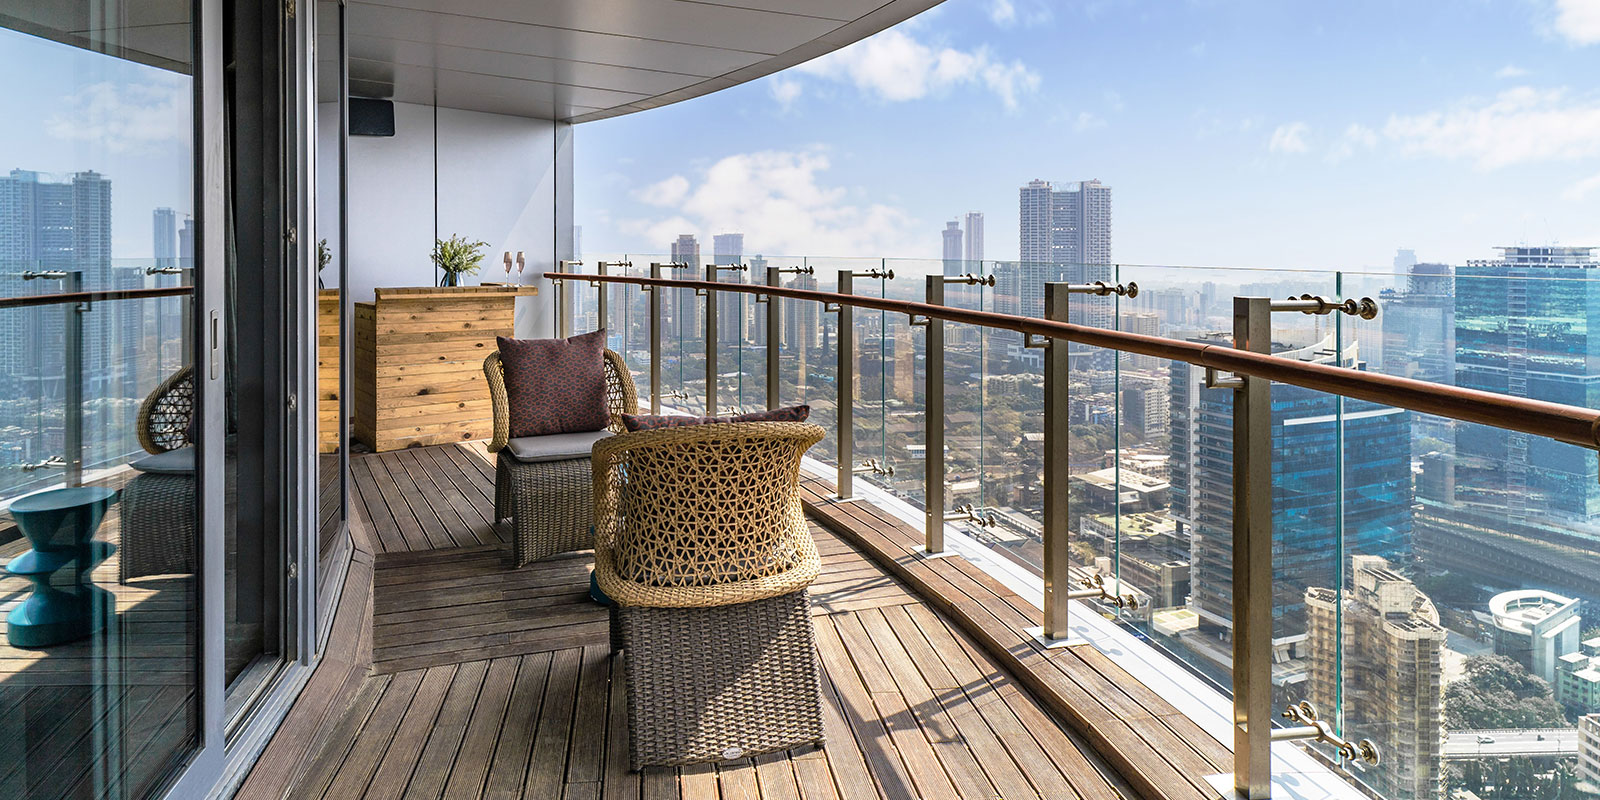 Expansive viewing decks for you to take in the breathtaking views of the city’s skyline.